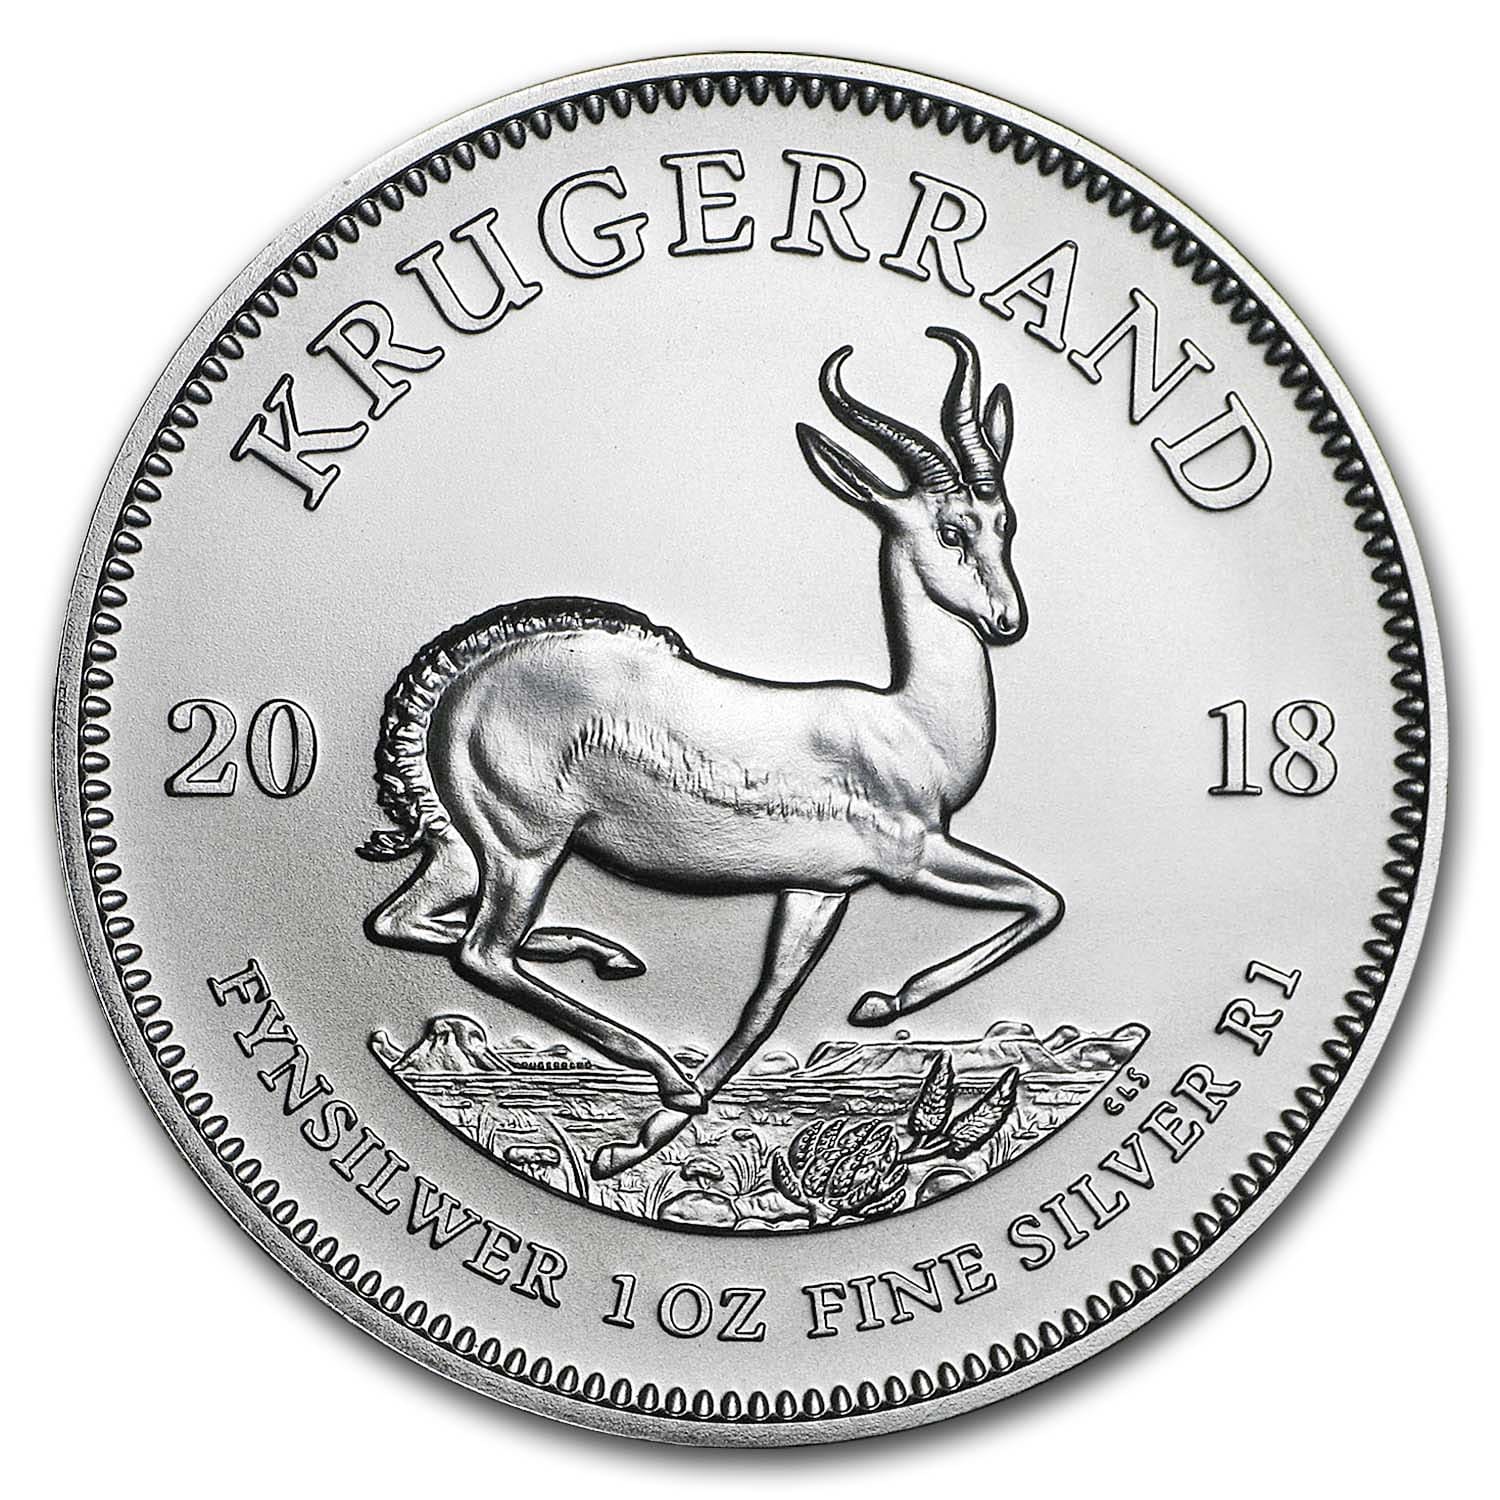 Lot of 10-2018 South Africa Silver Krugerrand 1 oz Brilliant Uncirculated